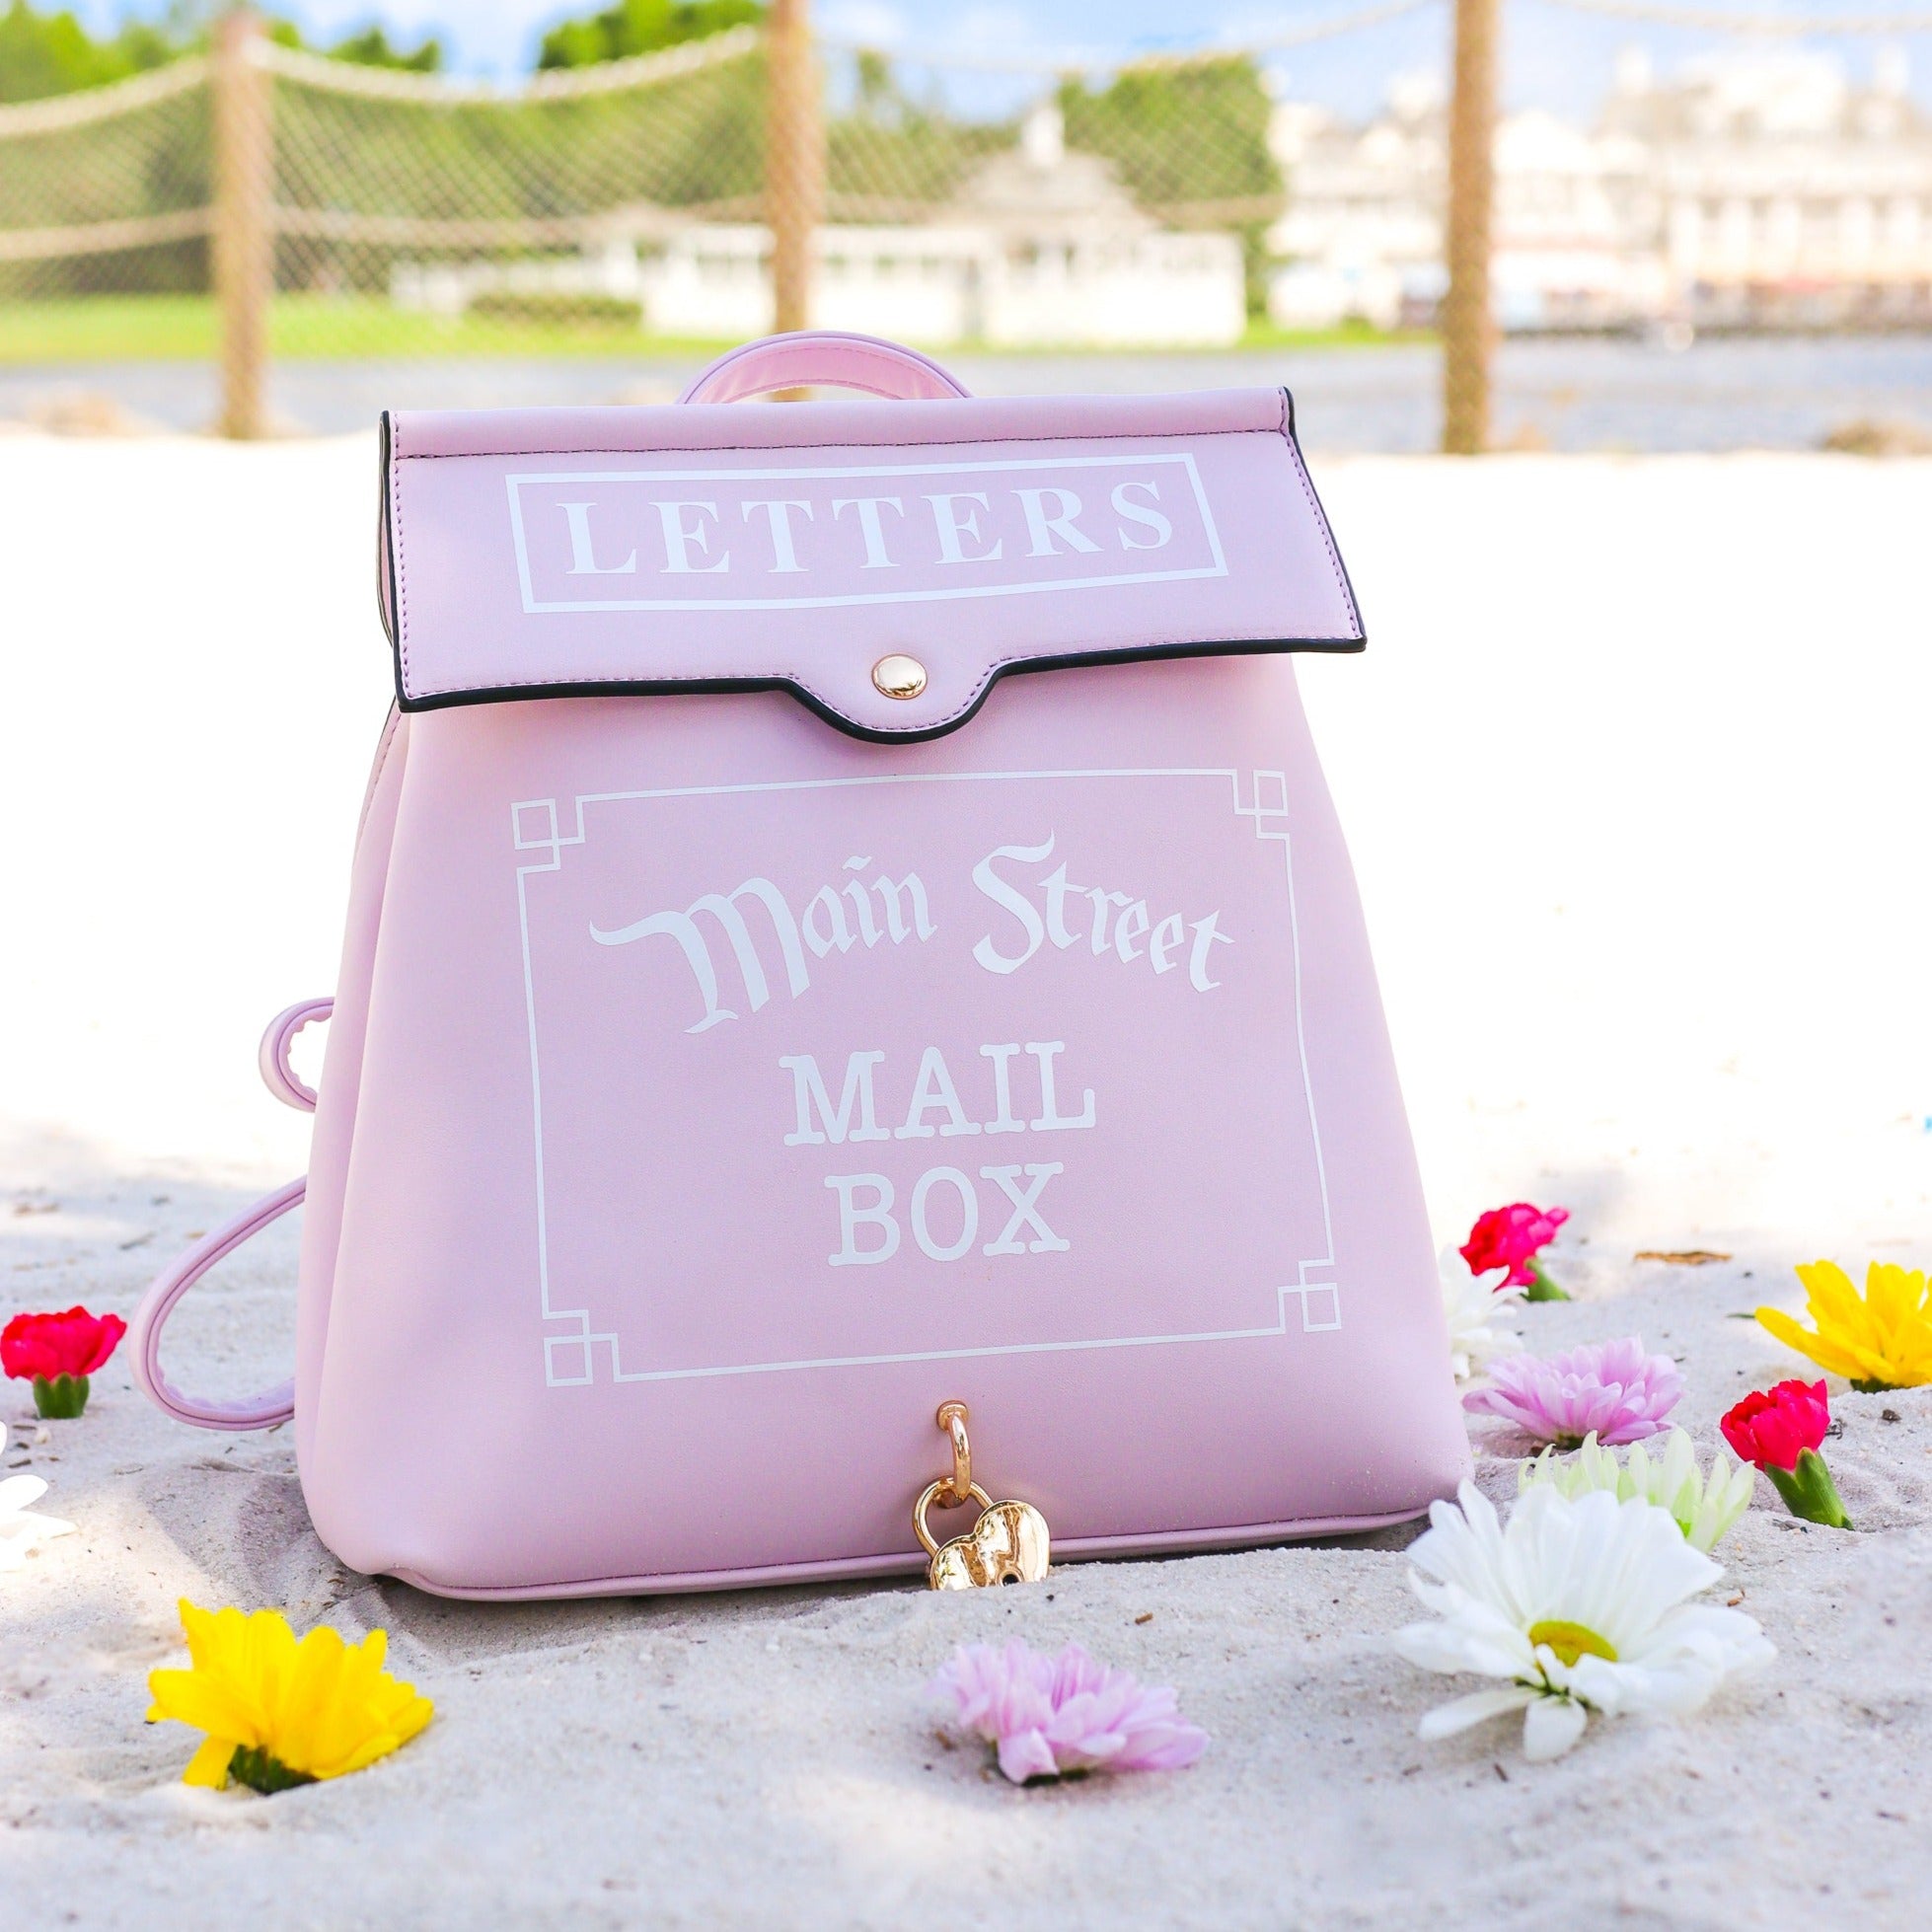 Lavender Main Street Mailbox Backpack - AUGUST PREORDER - Park Candy